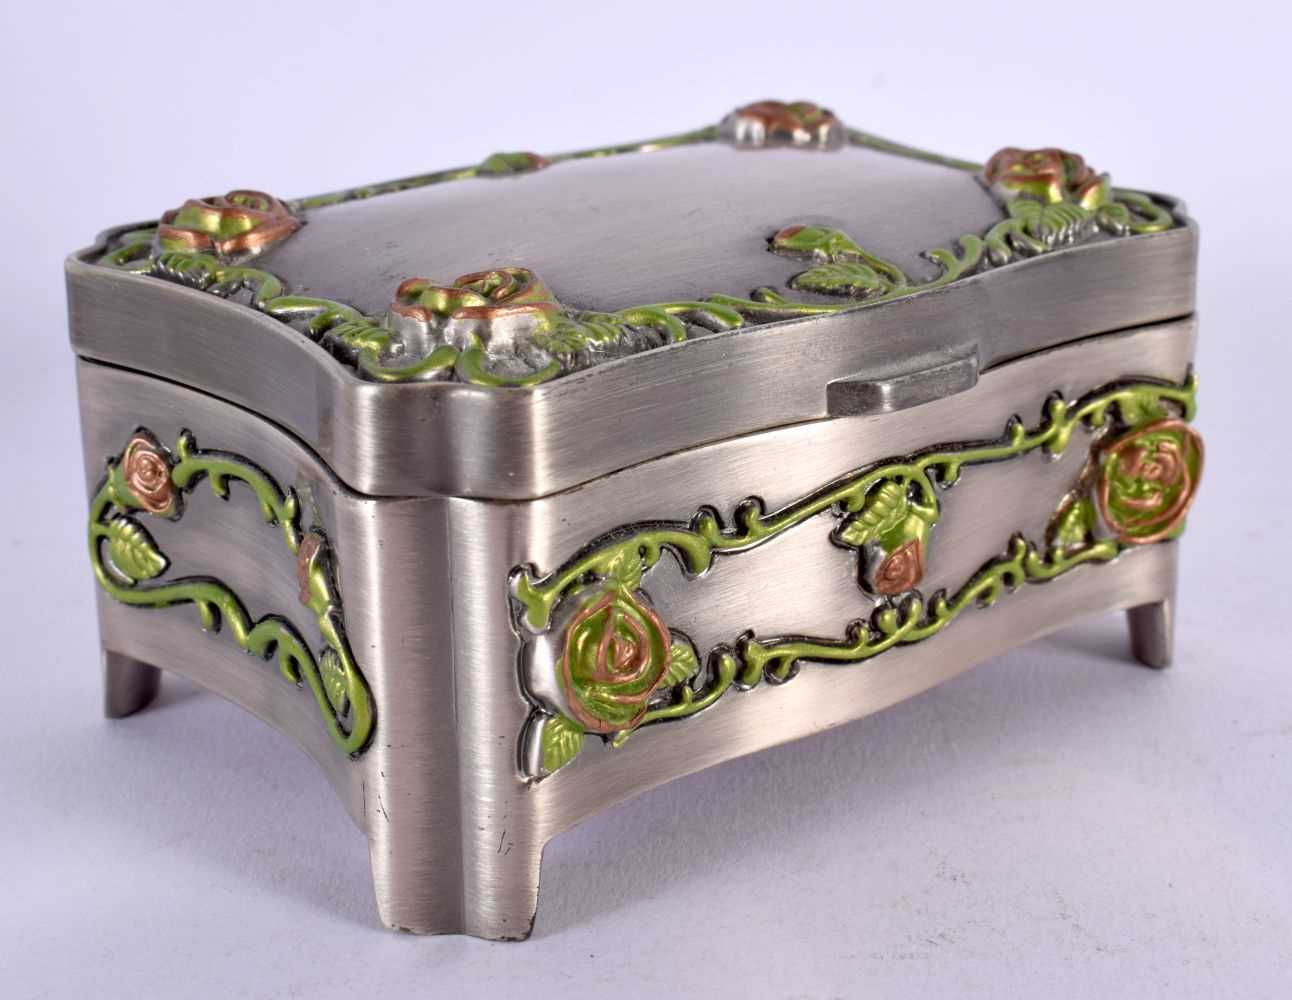 AN UNUSUAL ENAMELLED WHITE METAL JEWELLERY BOX overlaid with foliage and vines. 381 grams. 10 cm x 7